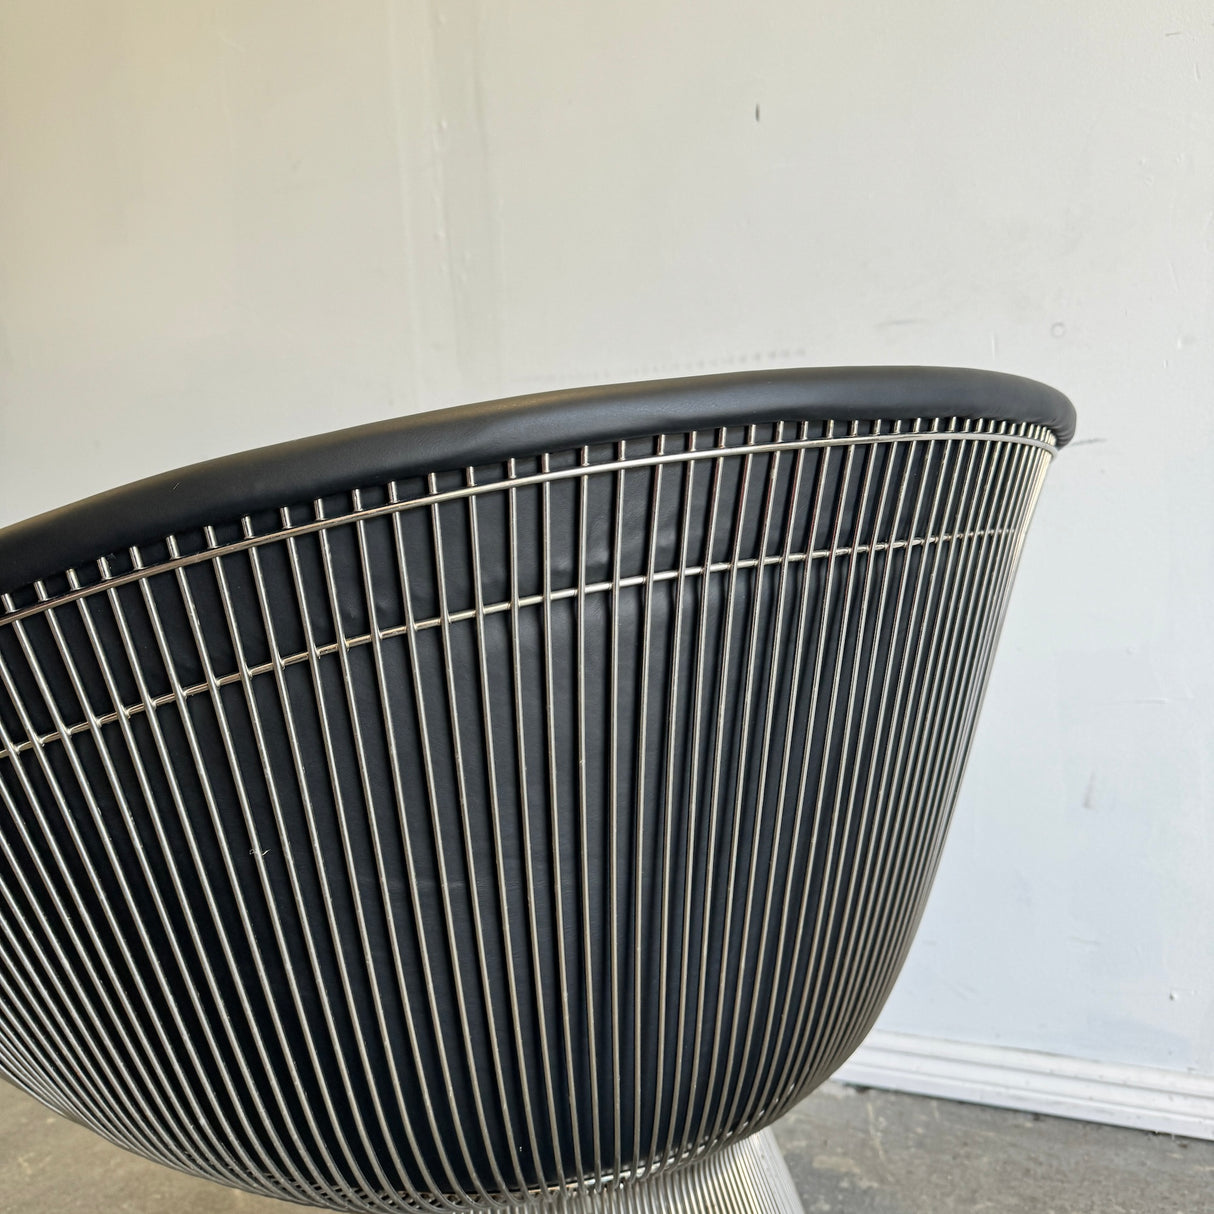 Authentic! Knoll Warren Platner Leather Lounge Chair